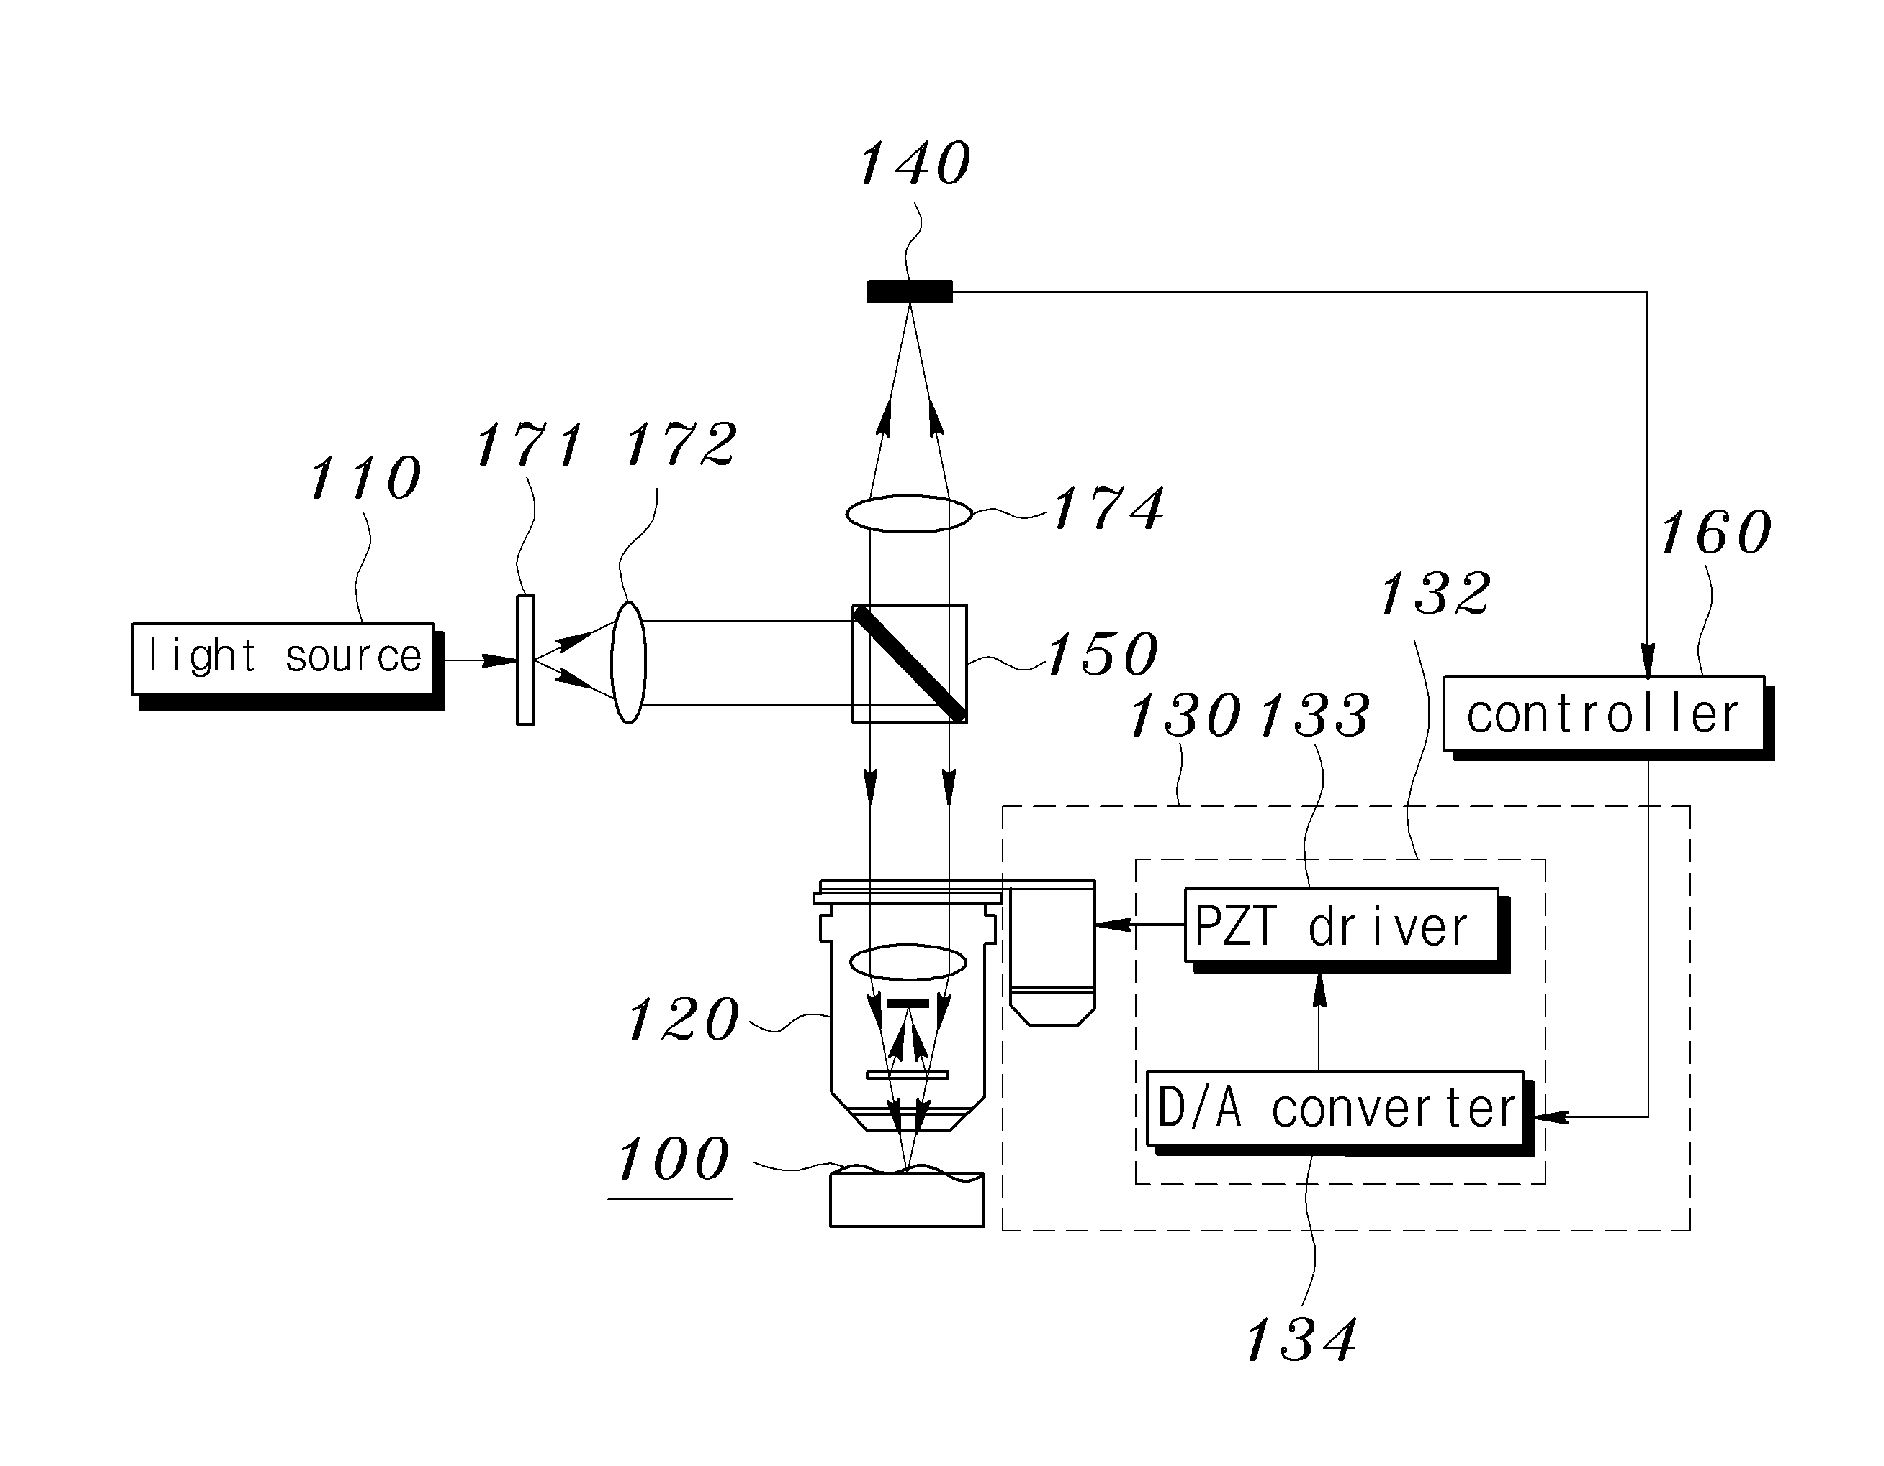 Three-dimensional profile measurement apparatus and method using amplitude size of projection grid